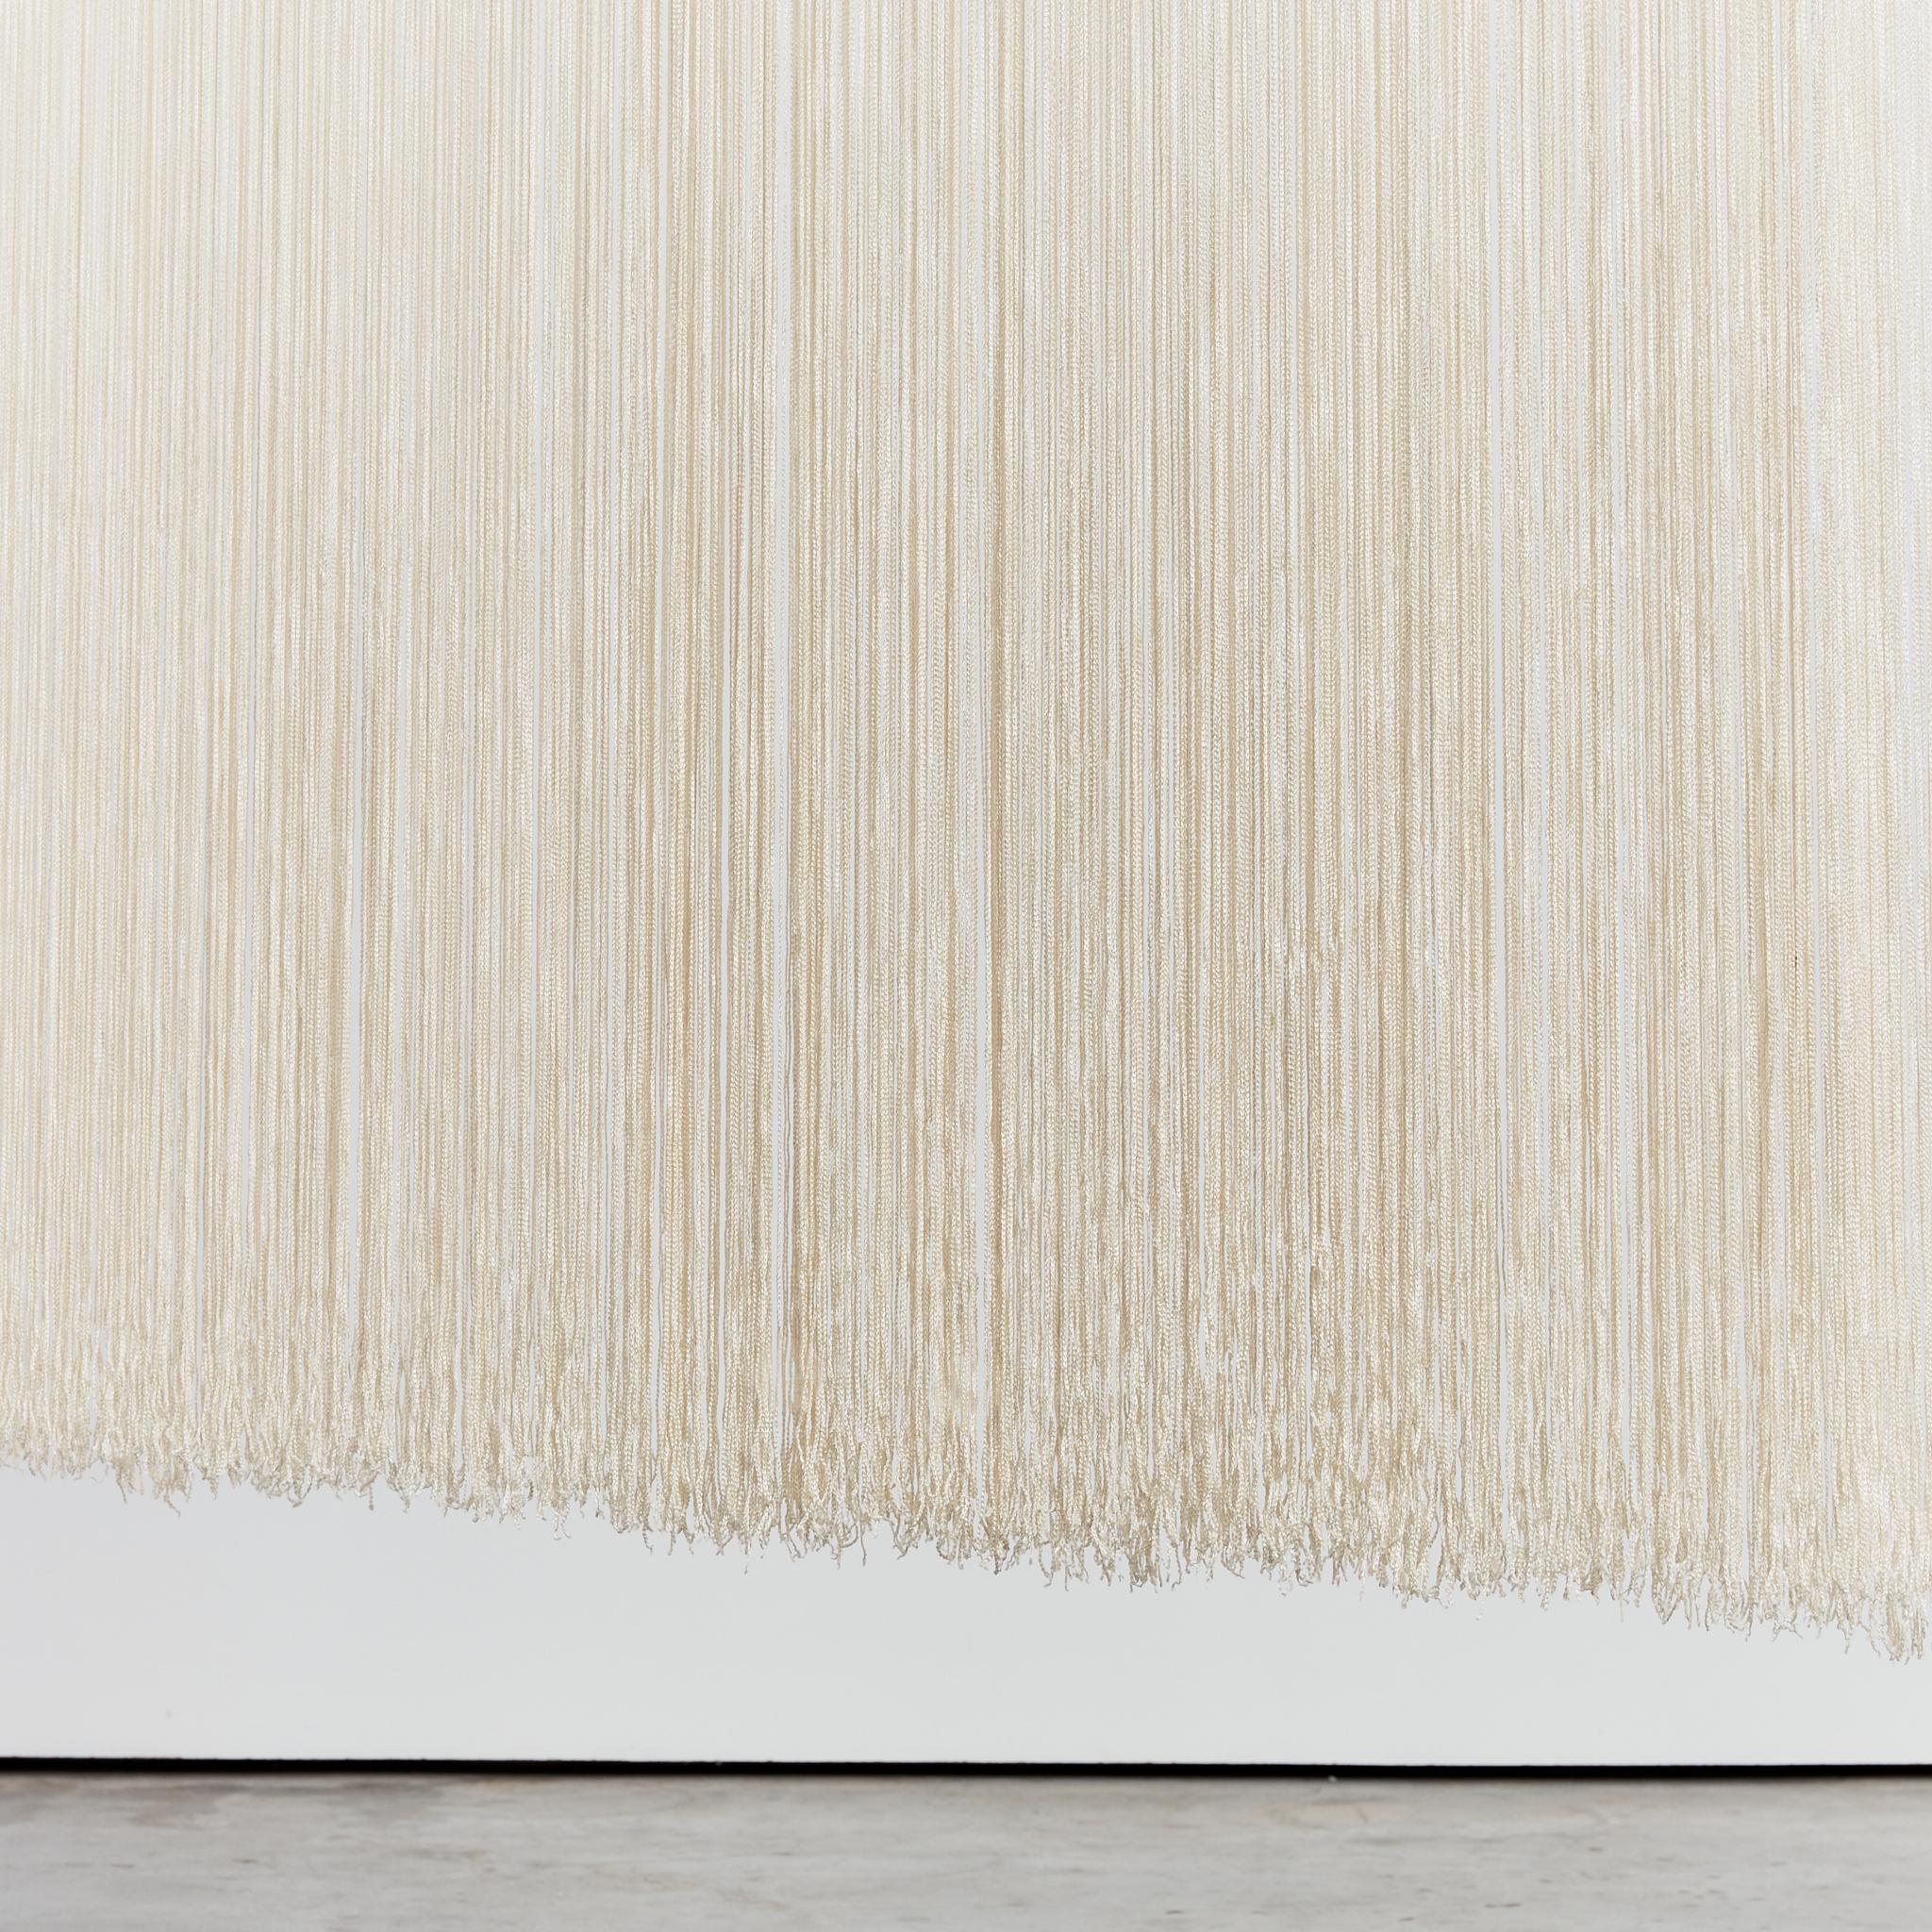 Statement Garbo fringed ceiling lamp by Mariyo Yagi for Sirrah 1970's edition For Sale 13